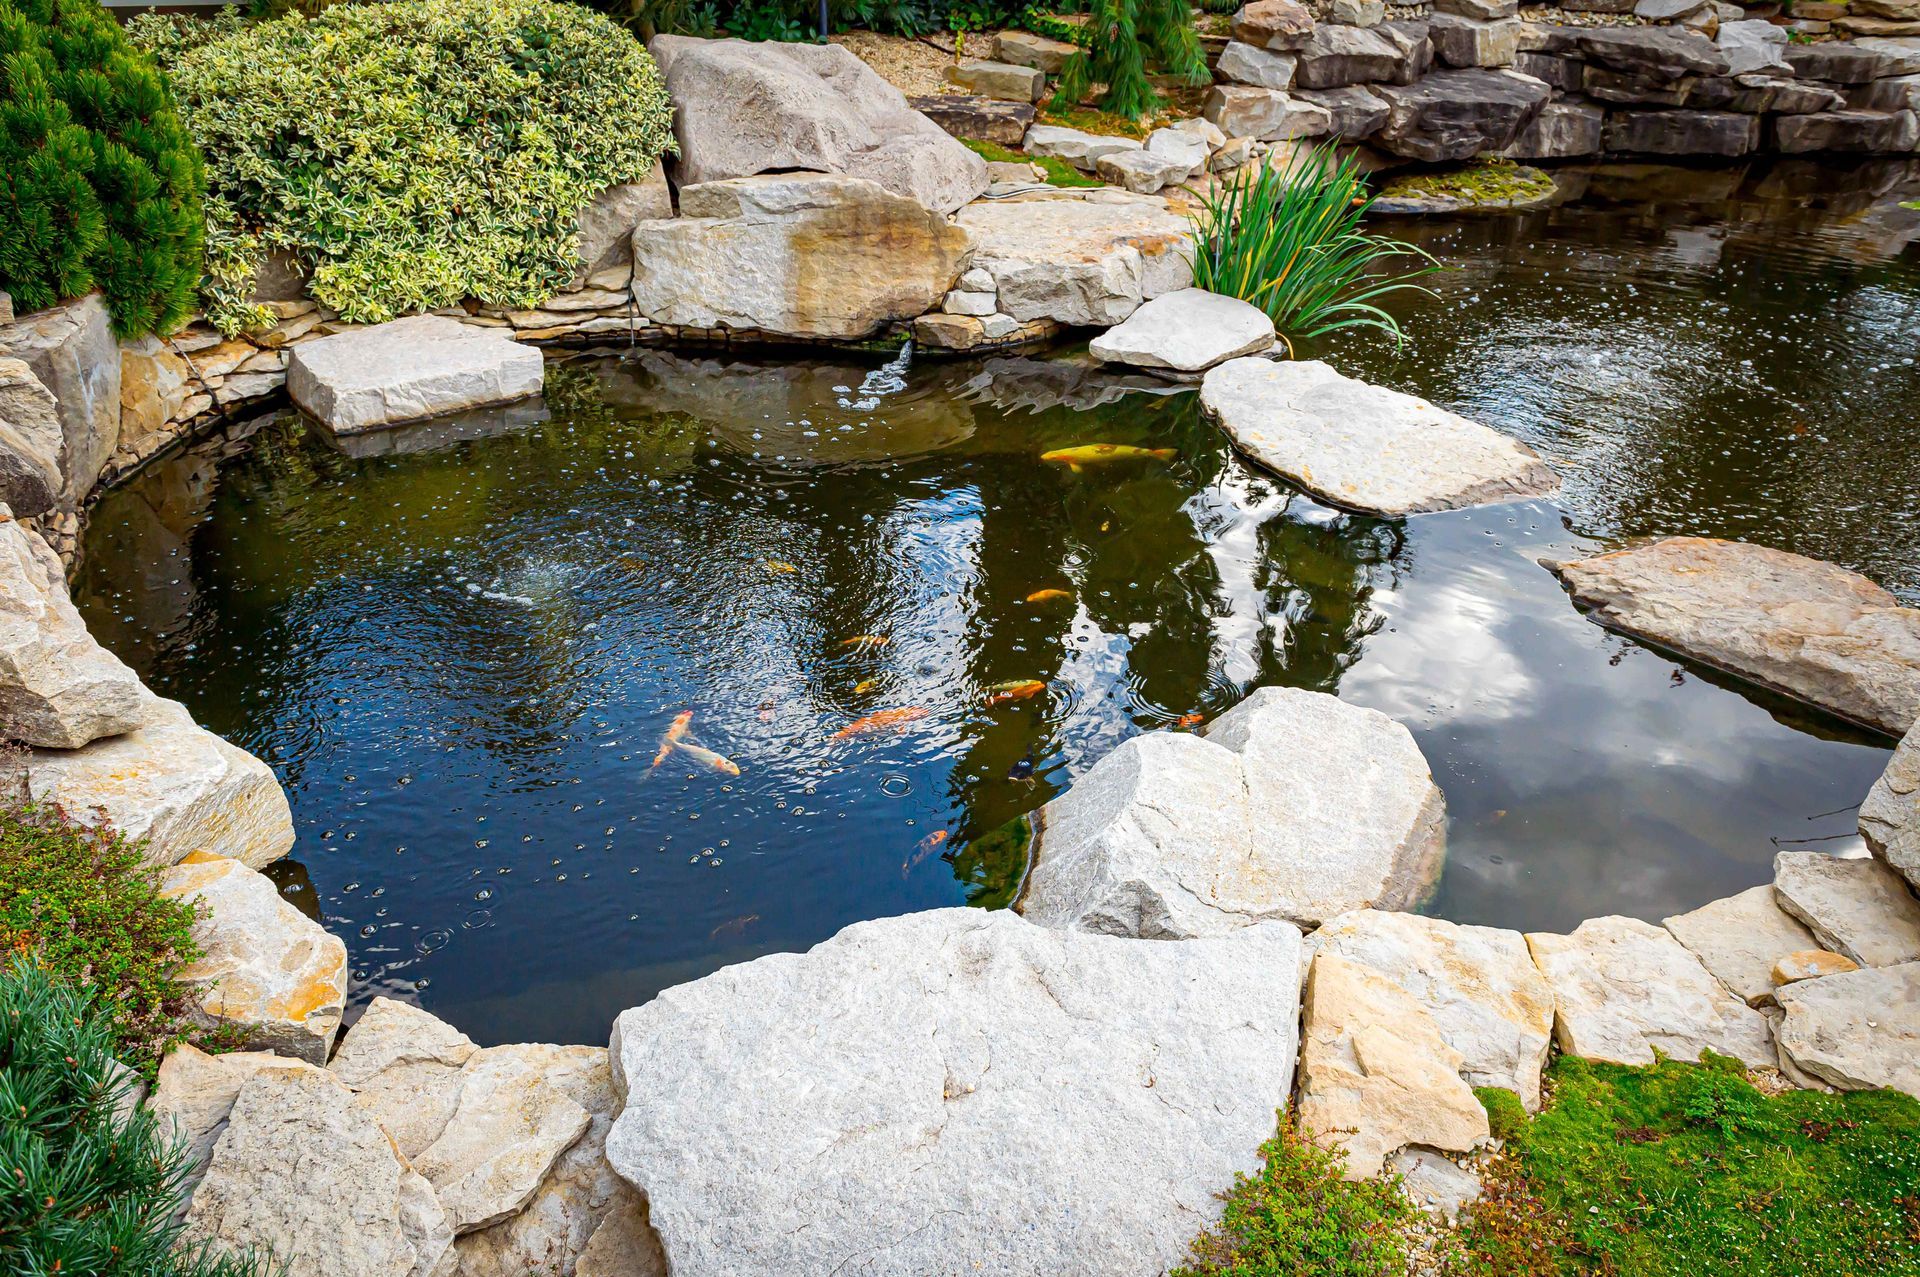 Koi fish in a backyard pond made out of boulders